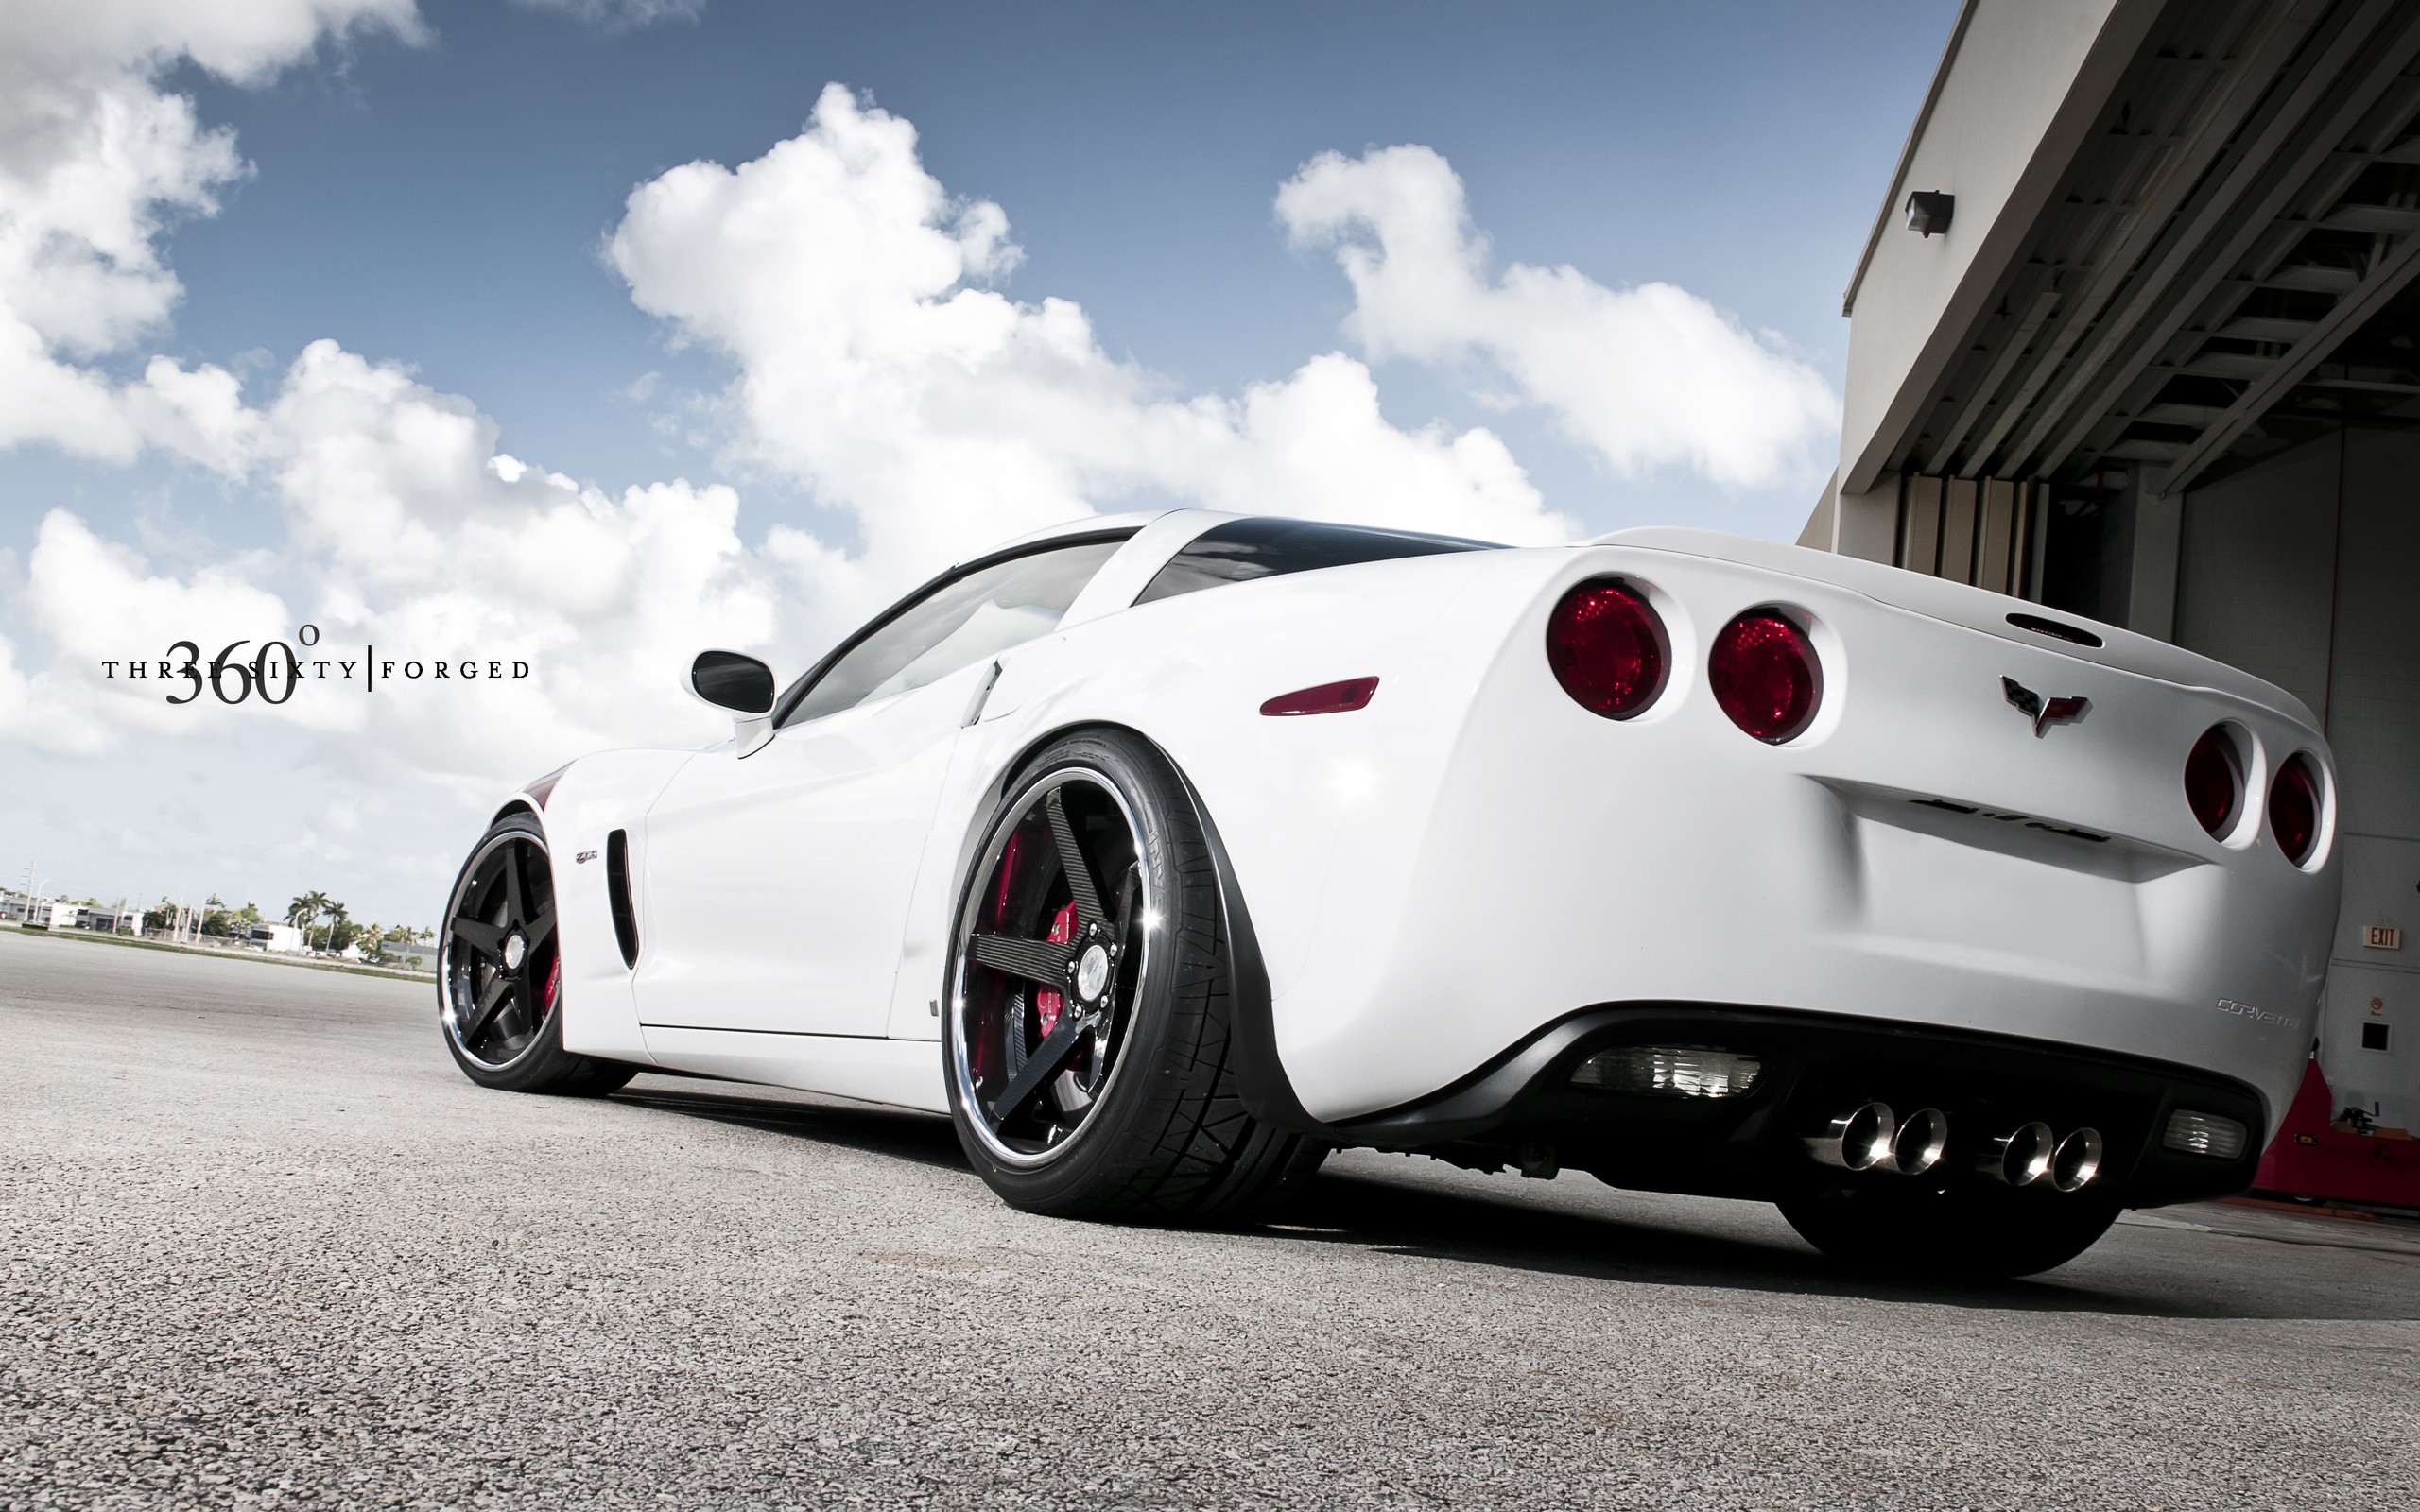 white, Cars, Vehicles, Supercars, Tuning, Chevrolet, Corvette, 360, Wheels, Chevrolet, Corvette, Z06, Sport, Cars, Luxury, Sport, Cars, Speed, Automobiles Wallpaper